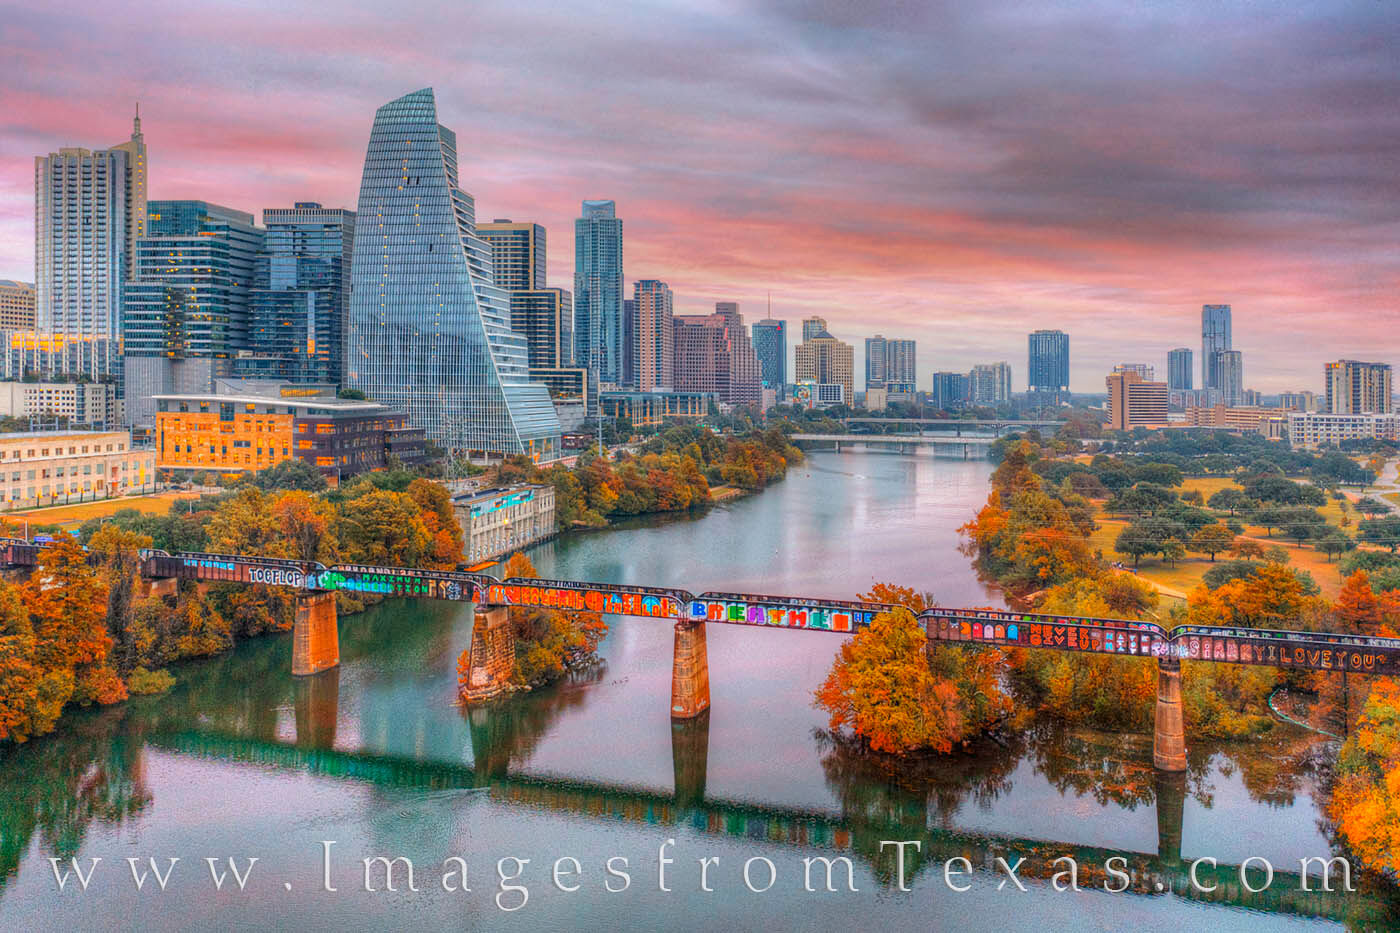 On a misty November morning in downtown Austin, the sky turned a pinkish hue for a few brief moments before fading into gray...